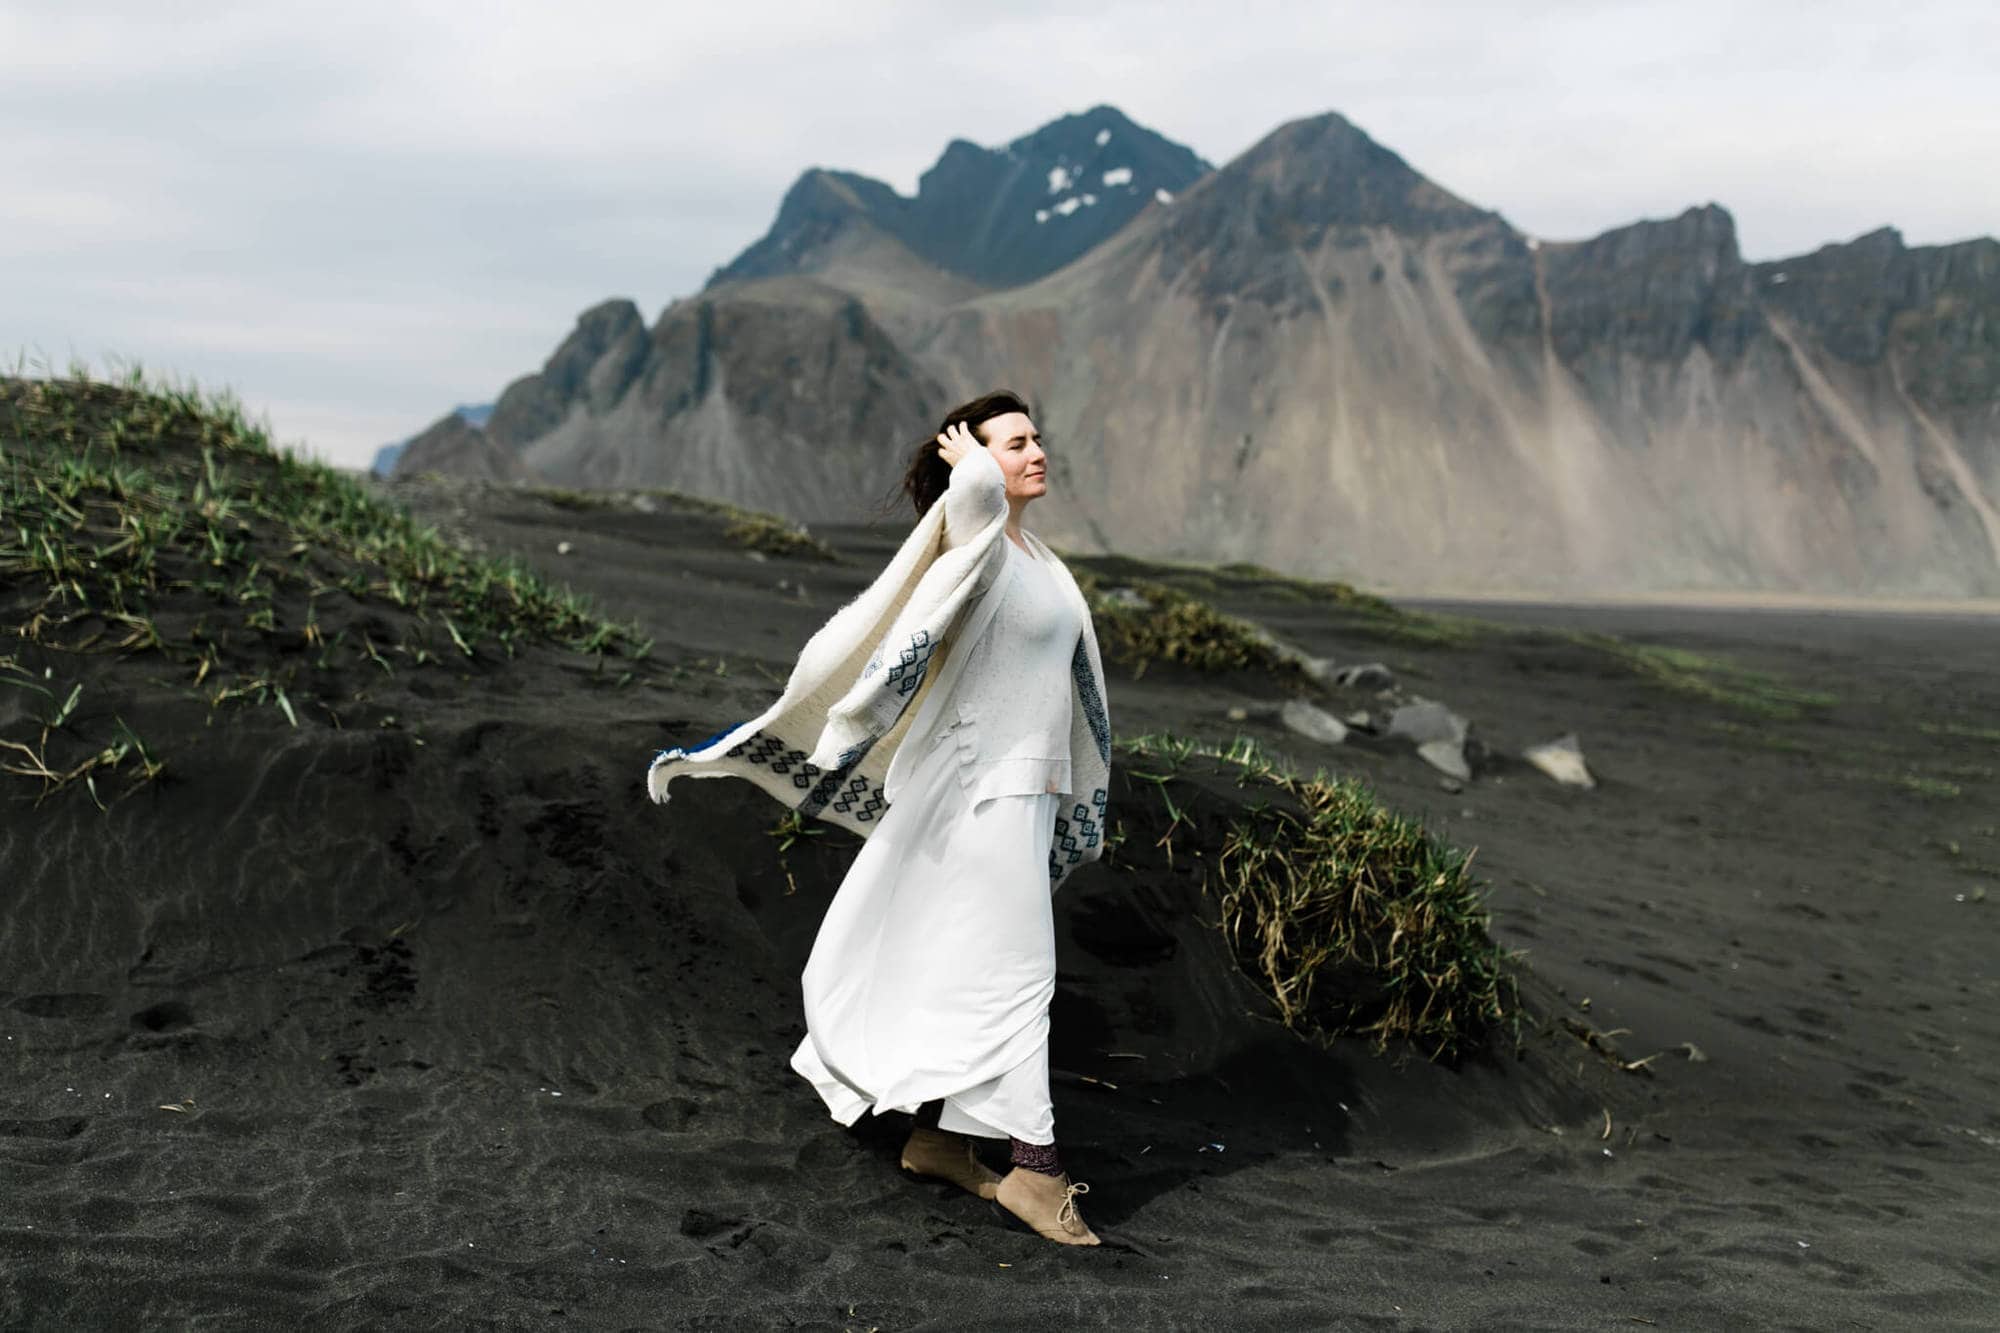 A bride stands among black sand dunes in Iceland. Wind catches her dress and sweater cape.